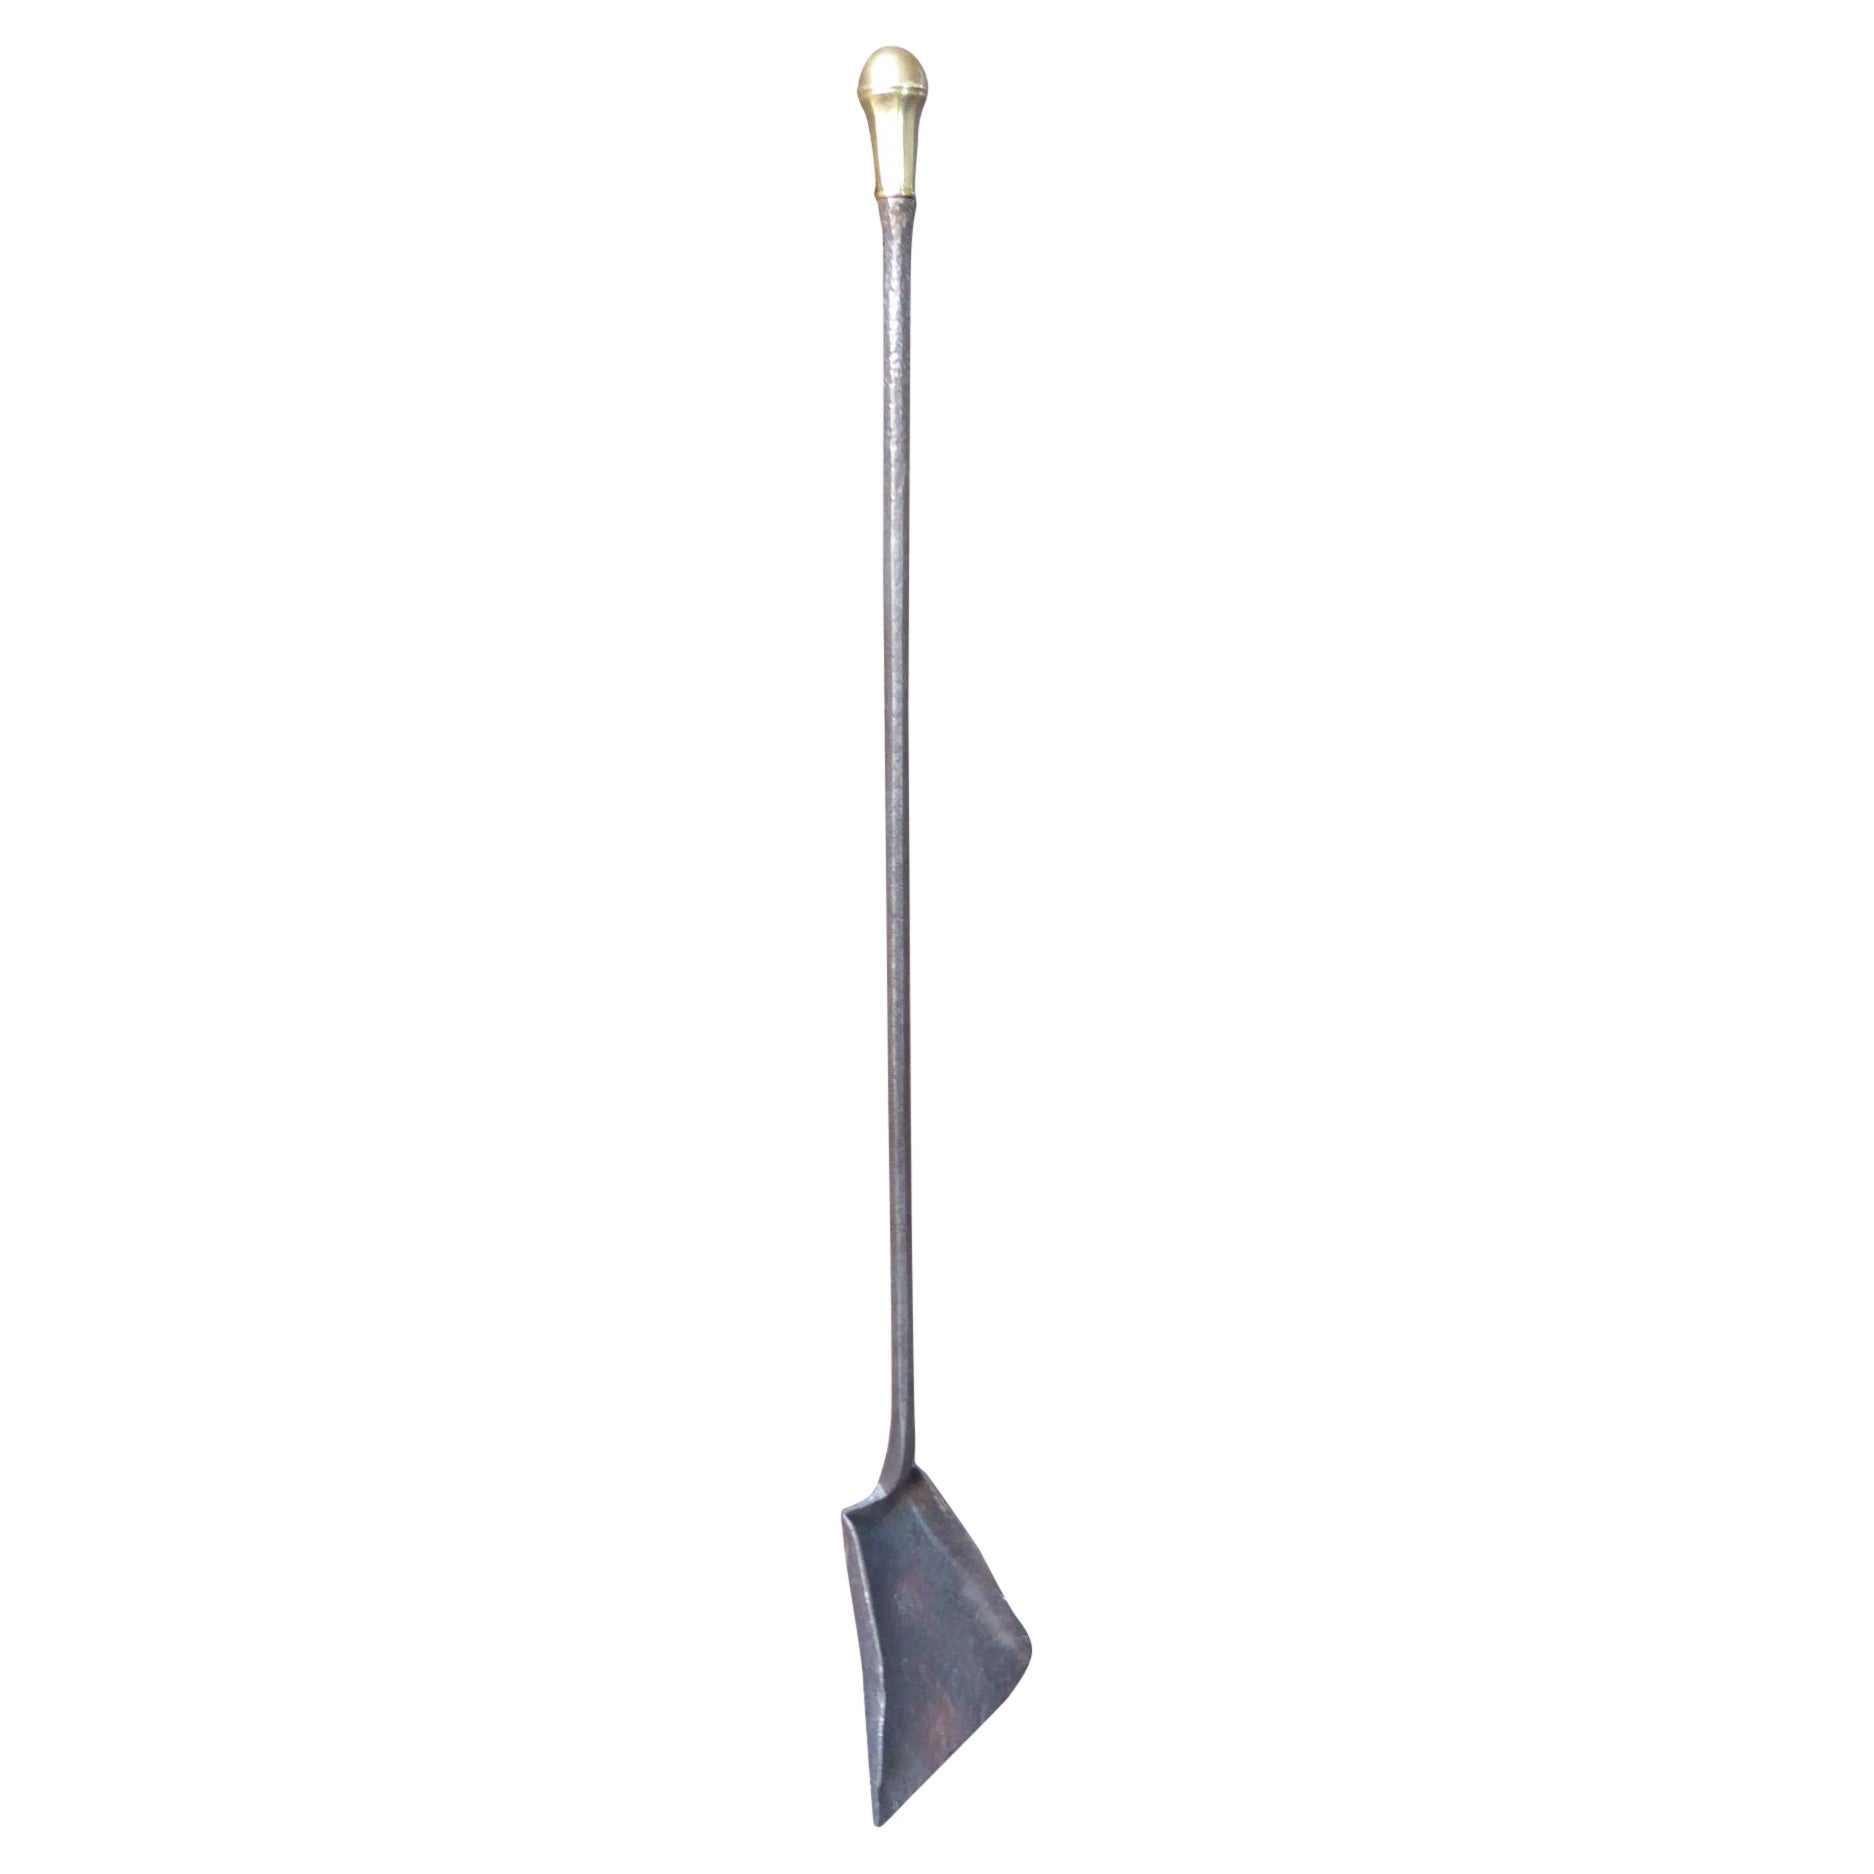 17th - 18th Century French Fireplace Shovel or Fire Shovel